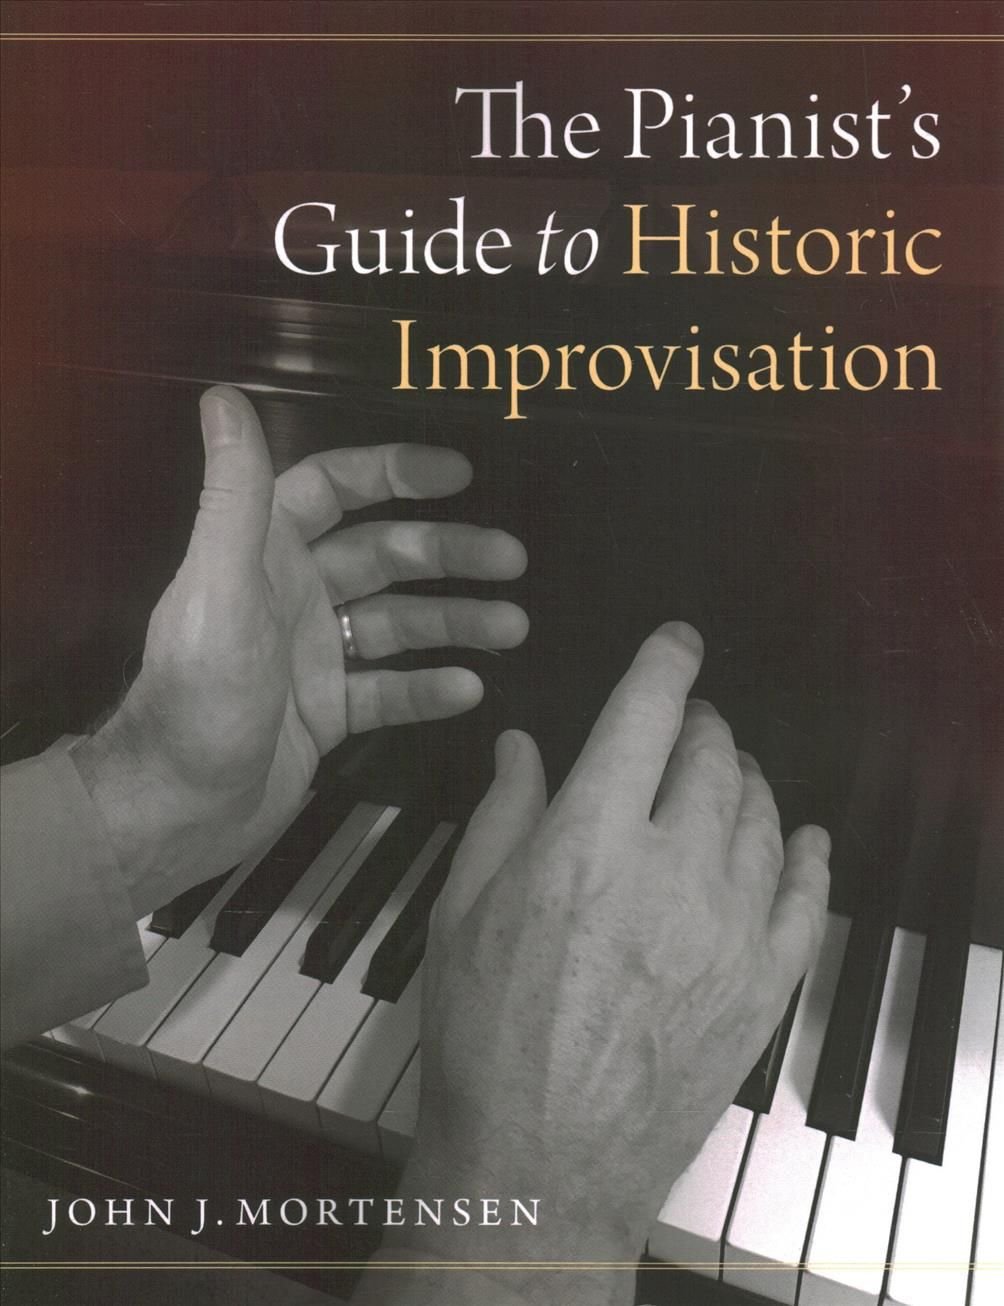 The Pianist's Guide to Historic Improvisation